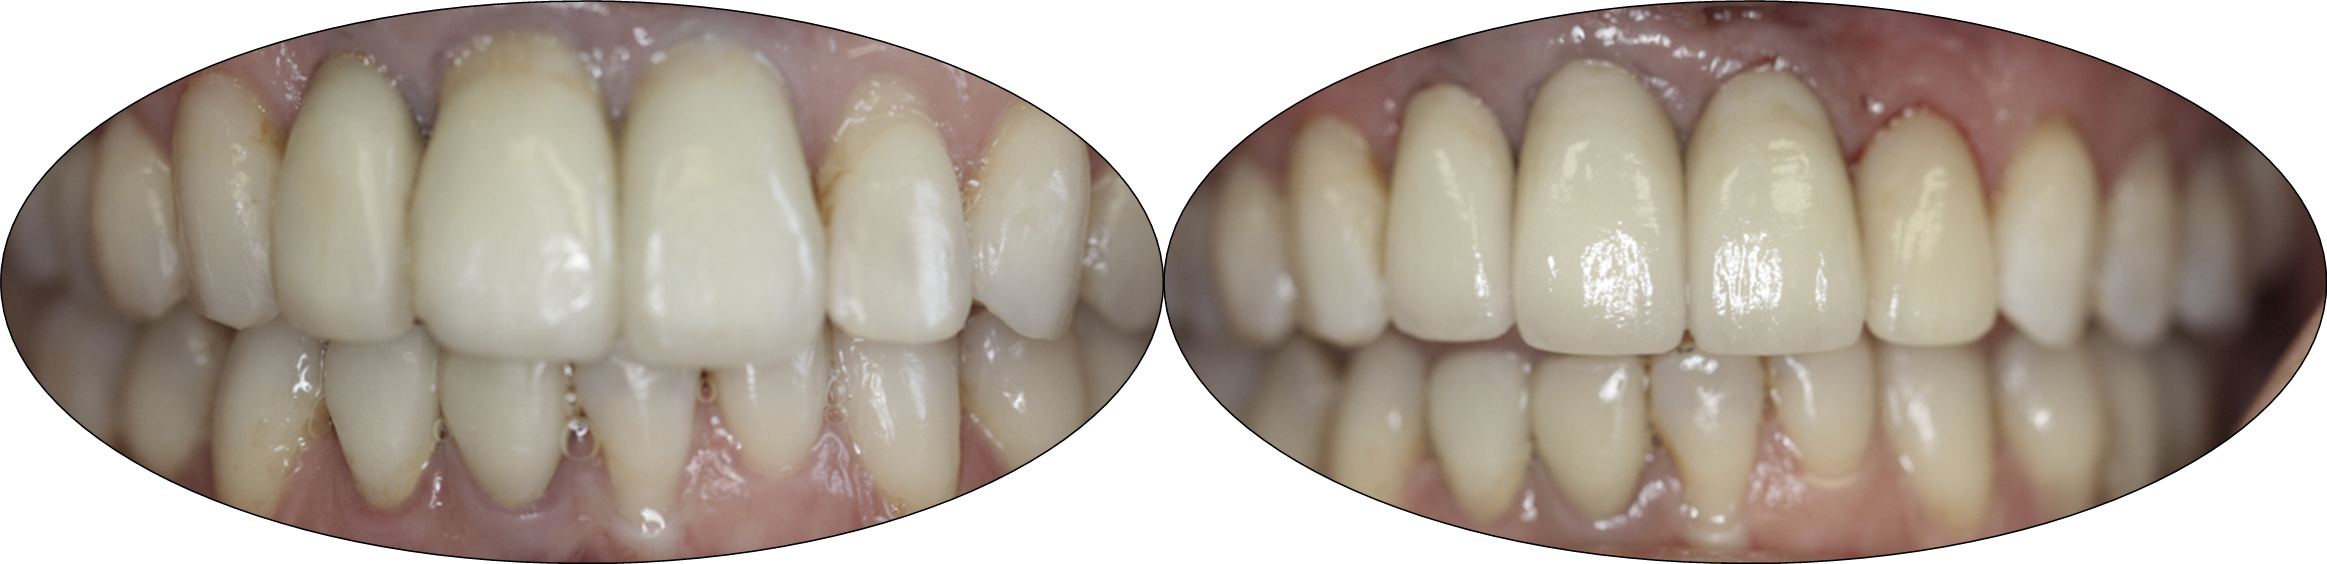 Before and after images of porcelain crowns over dental implants